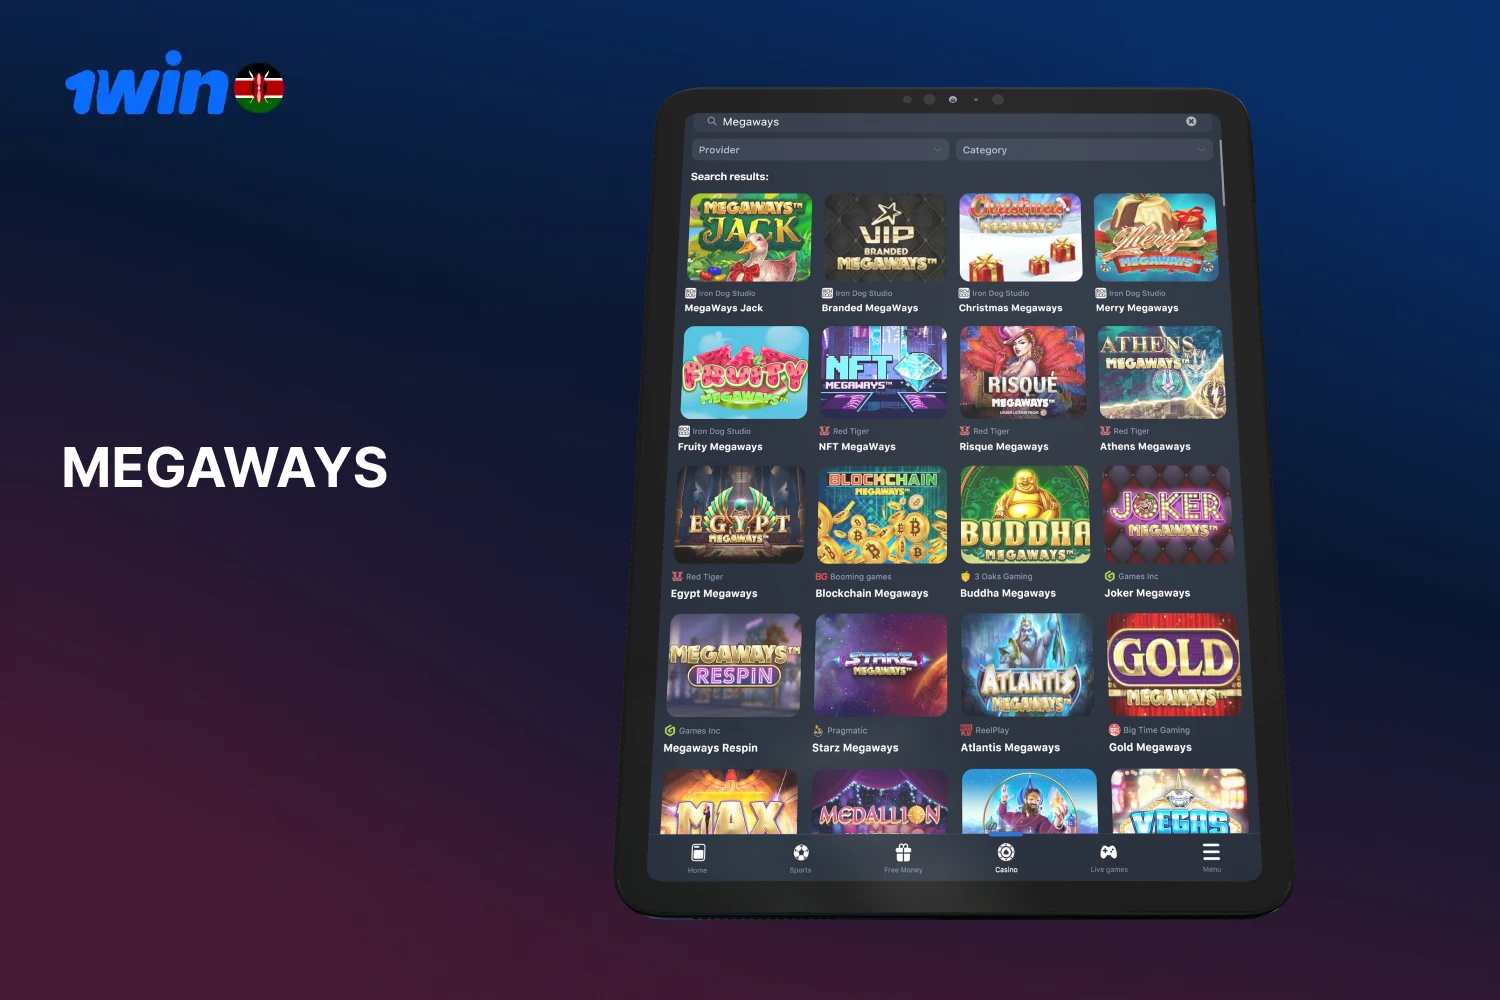 In the Megaways section, Kenyans will find an exciting selection of games from 1win Casino, of which there are over 100 pieces here